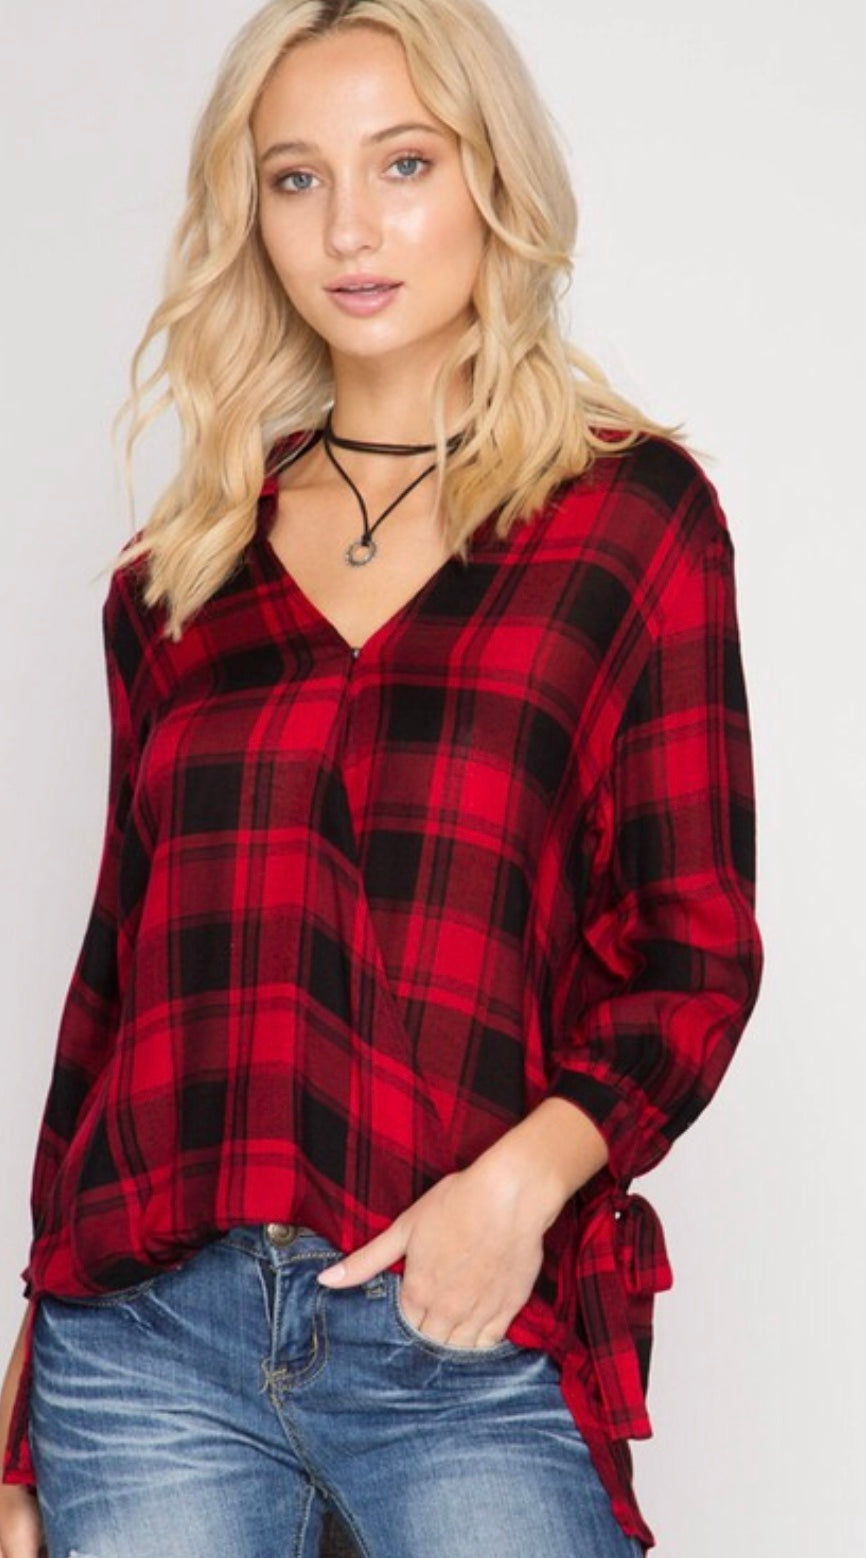 Red and Black Plaid Flannel Top